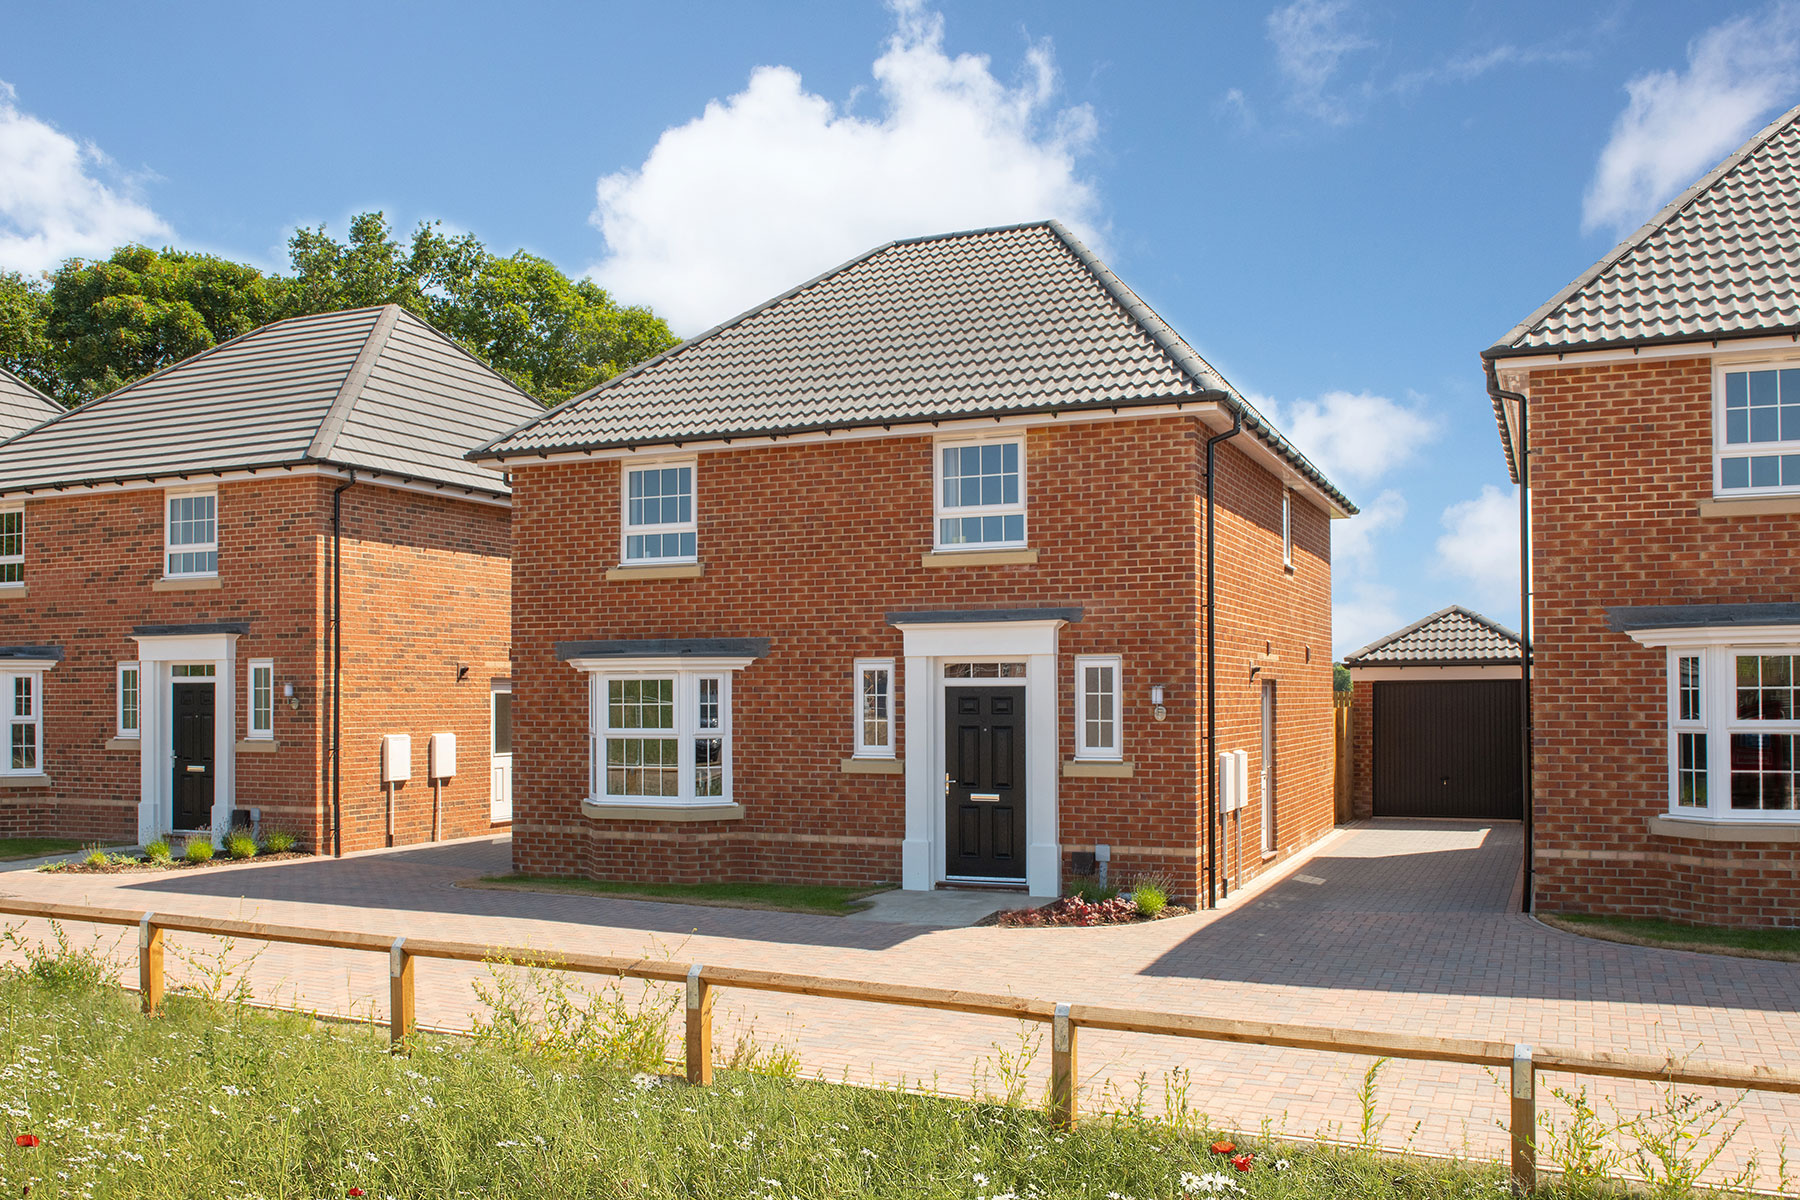 Property 1 of 9. The Kirkdale At Edwin Vale, Hatfield, Doncaster